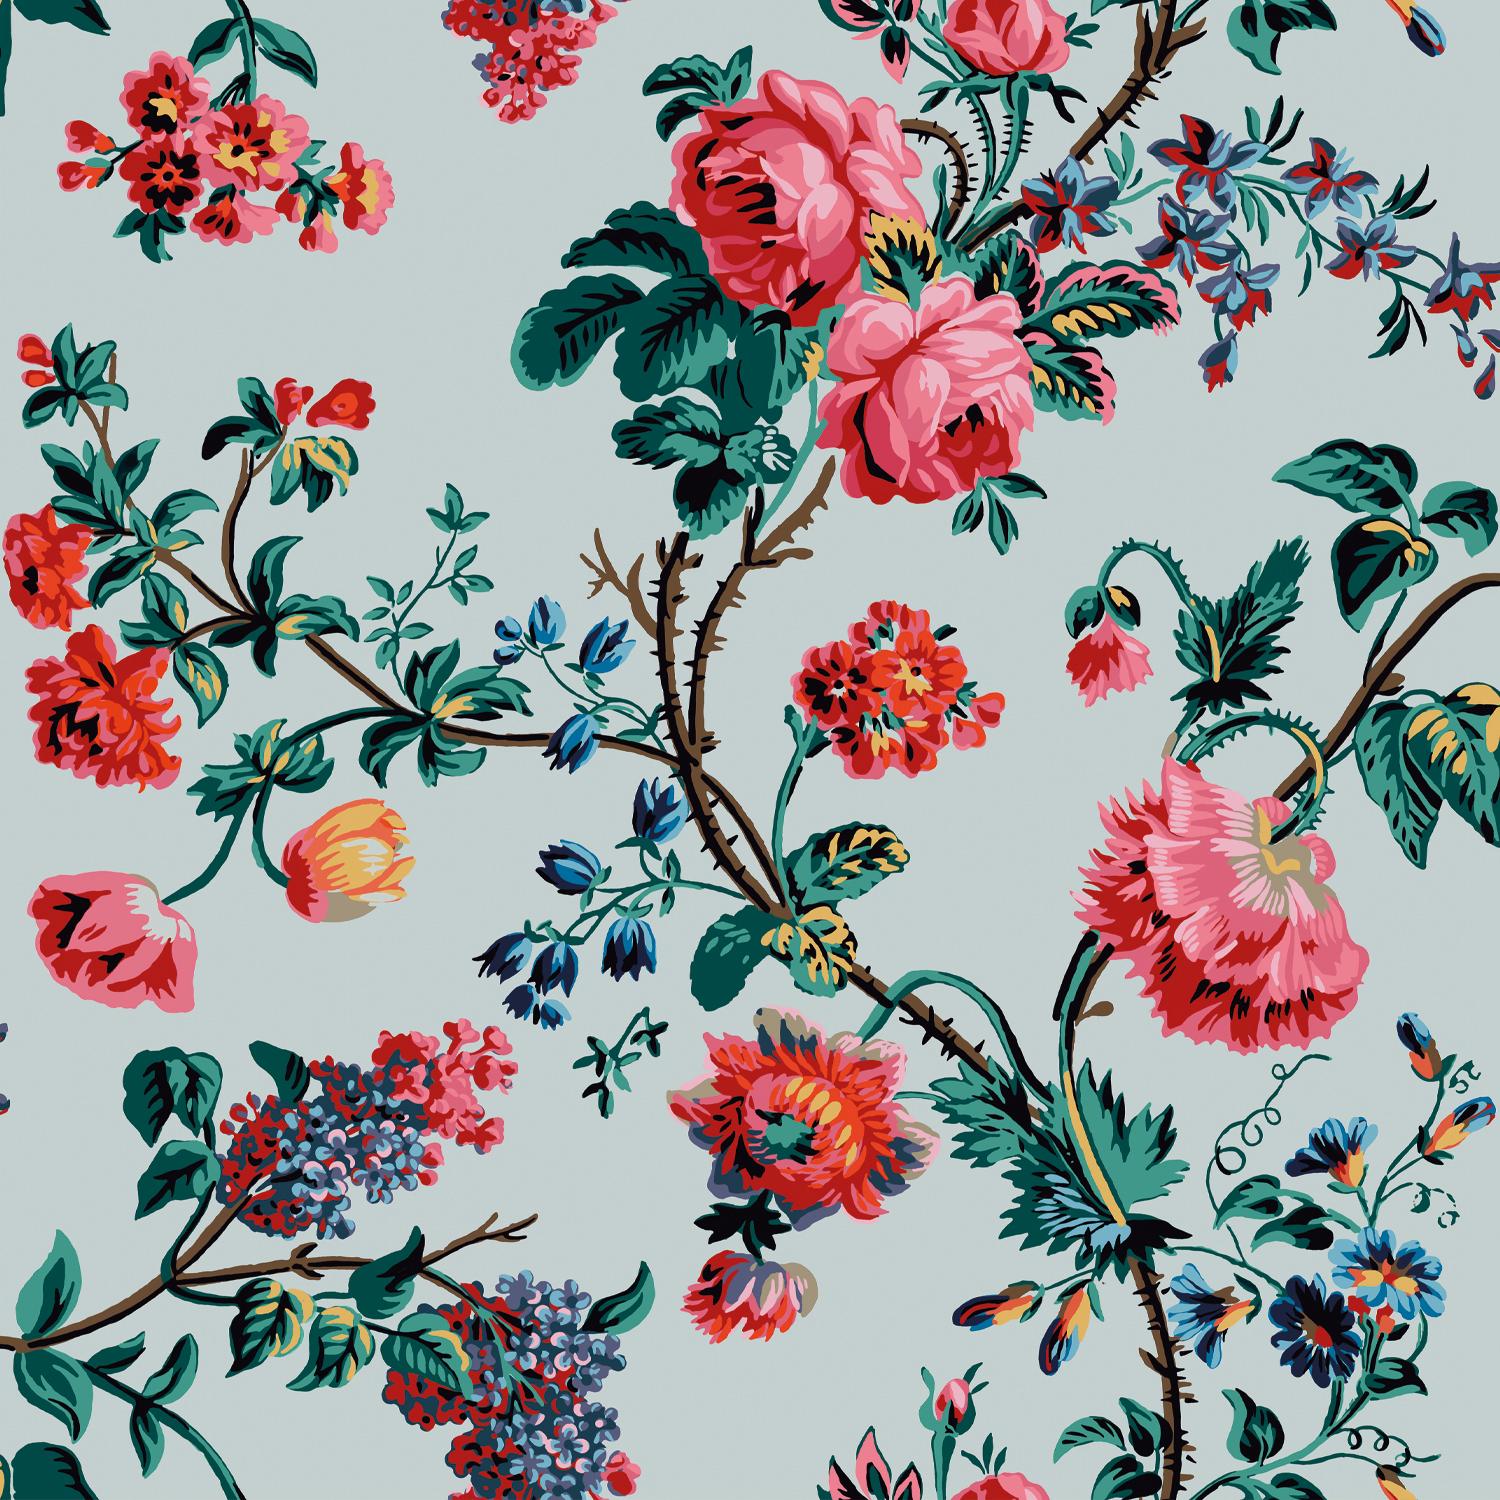 Repeat: 69,8 cm / 27.5 in
Offset Match : 35,6 cm / 14 in

Founded in 2019, the French wallpaper brand Papier Francais is defined by the rediscovery, restoration, and revival of iconic wallpapers dating back to the French “Golden Age of wallpaper” of